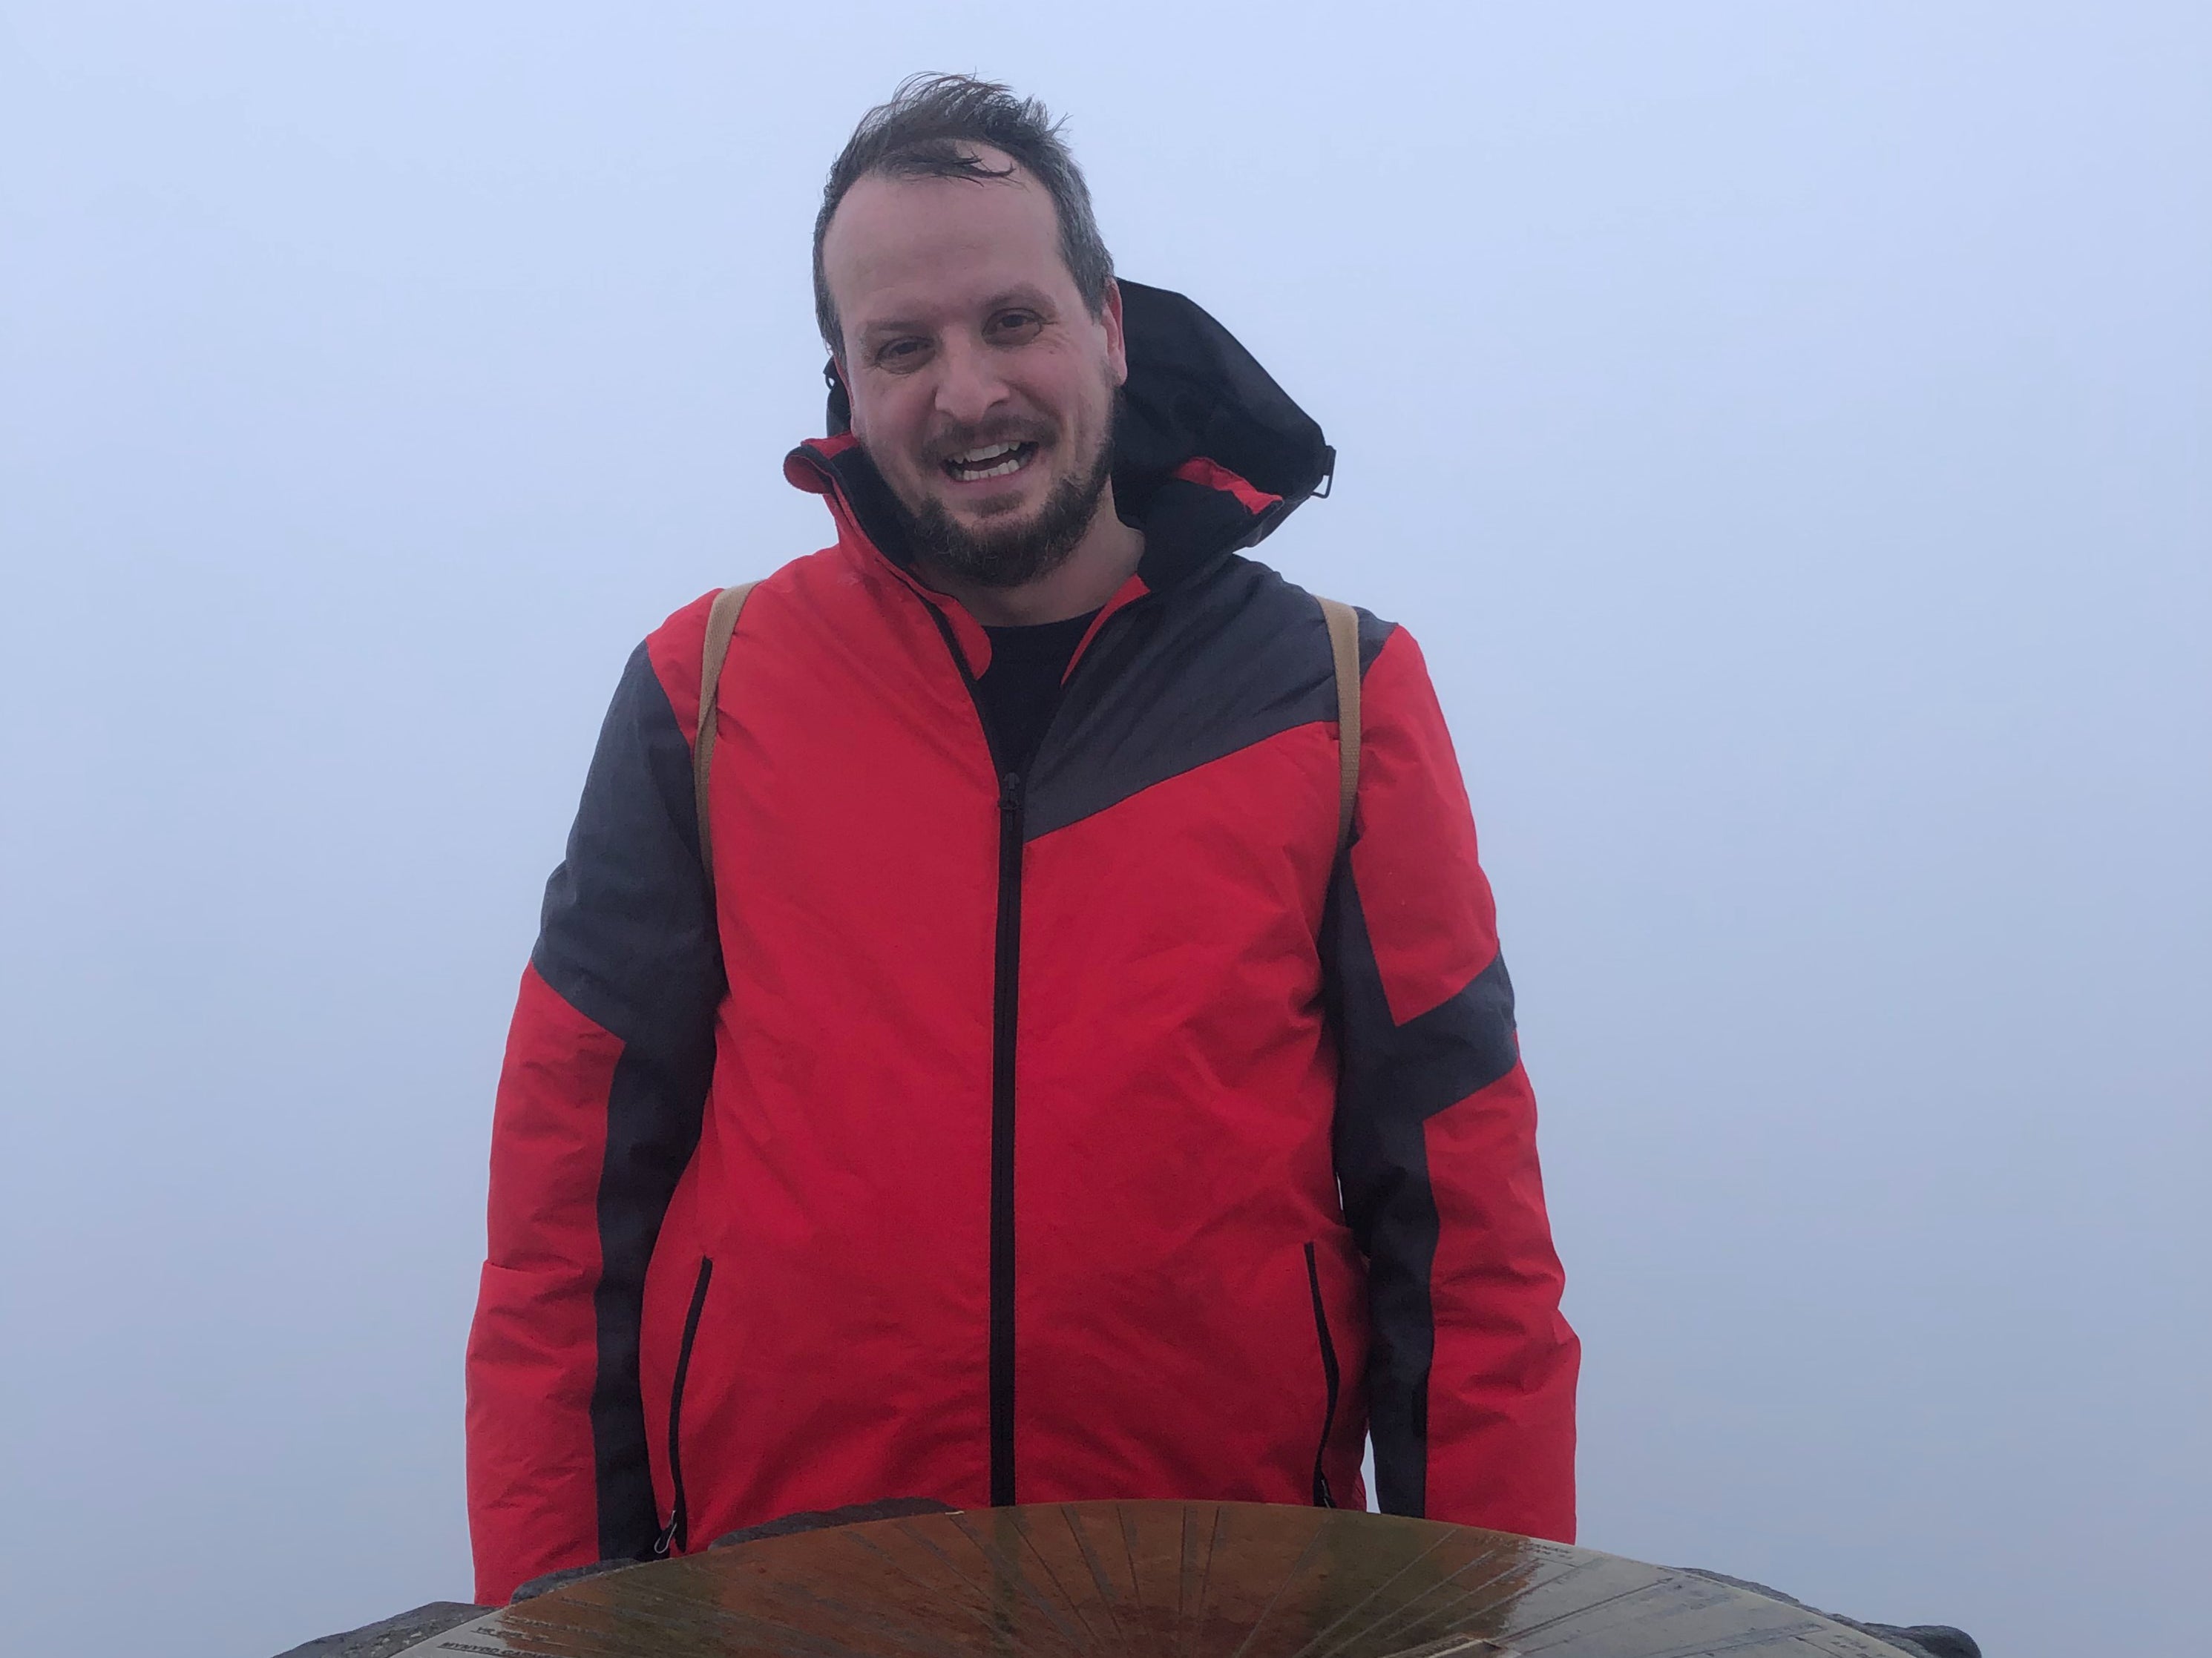 Daniel was rewarded with murky views at the summit